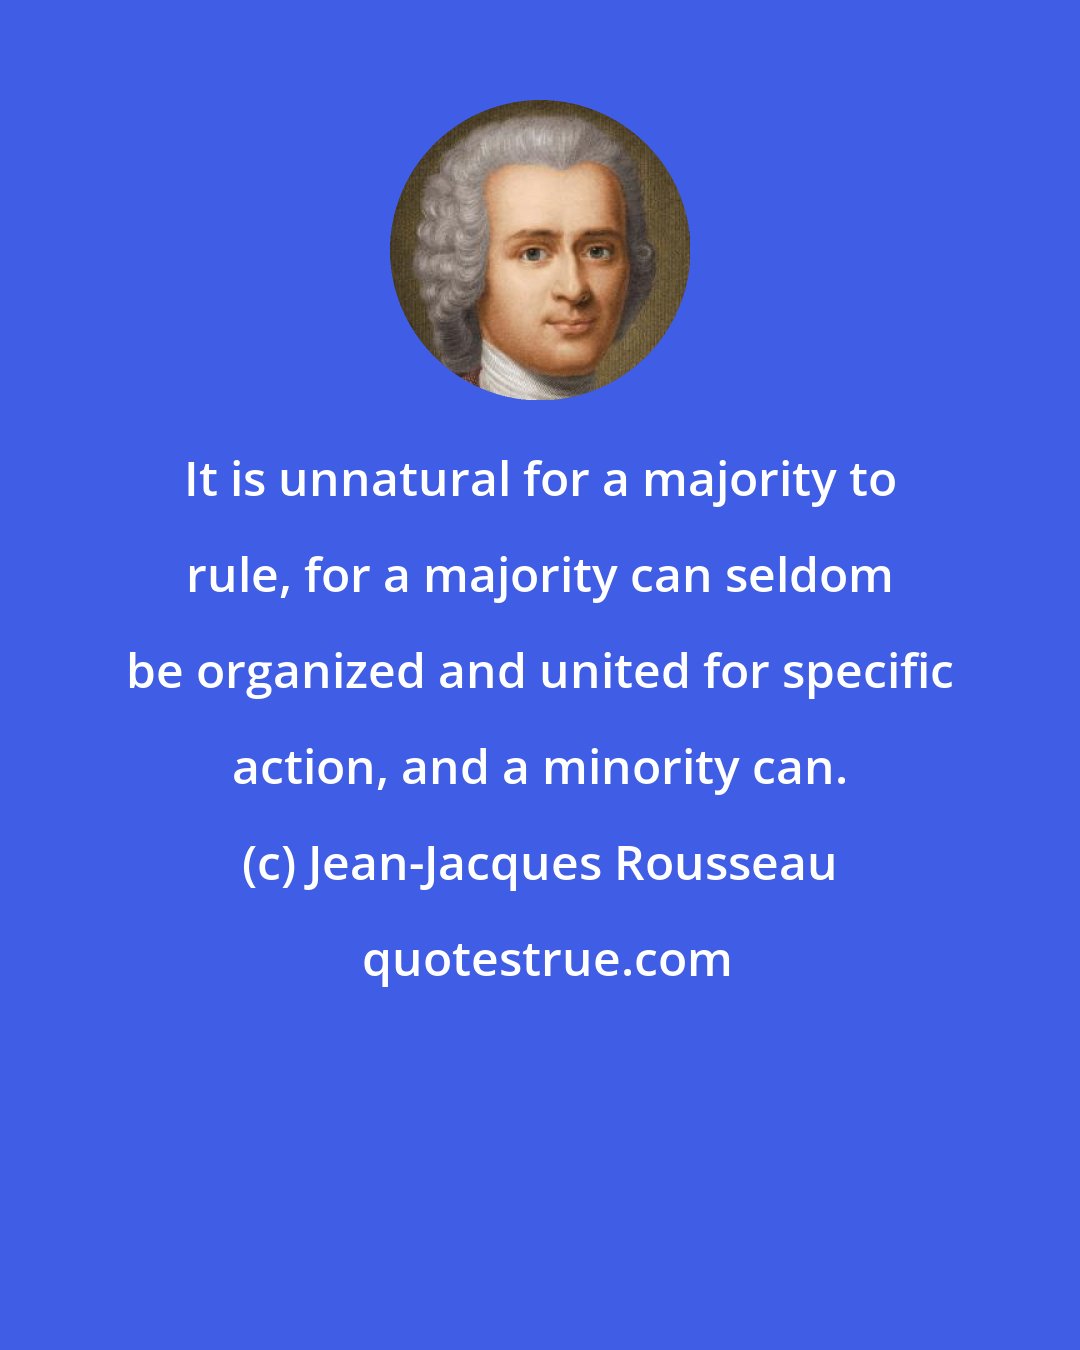 Jean-Jacques Rousseau: It is unnatural for a majority to rule, for a majority can seldom be organized and united for specific action, and a minority can.